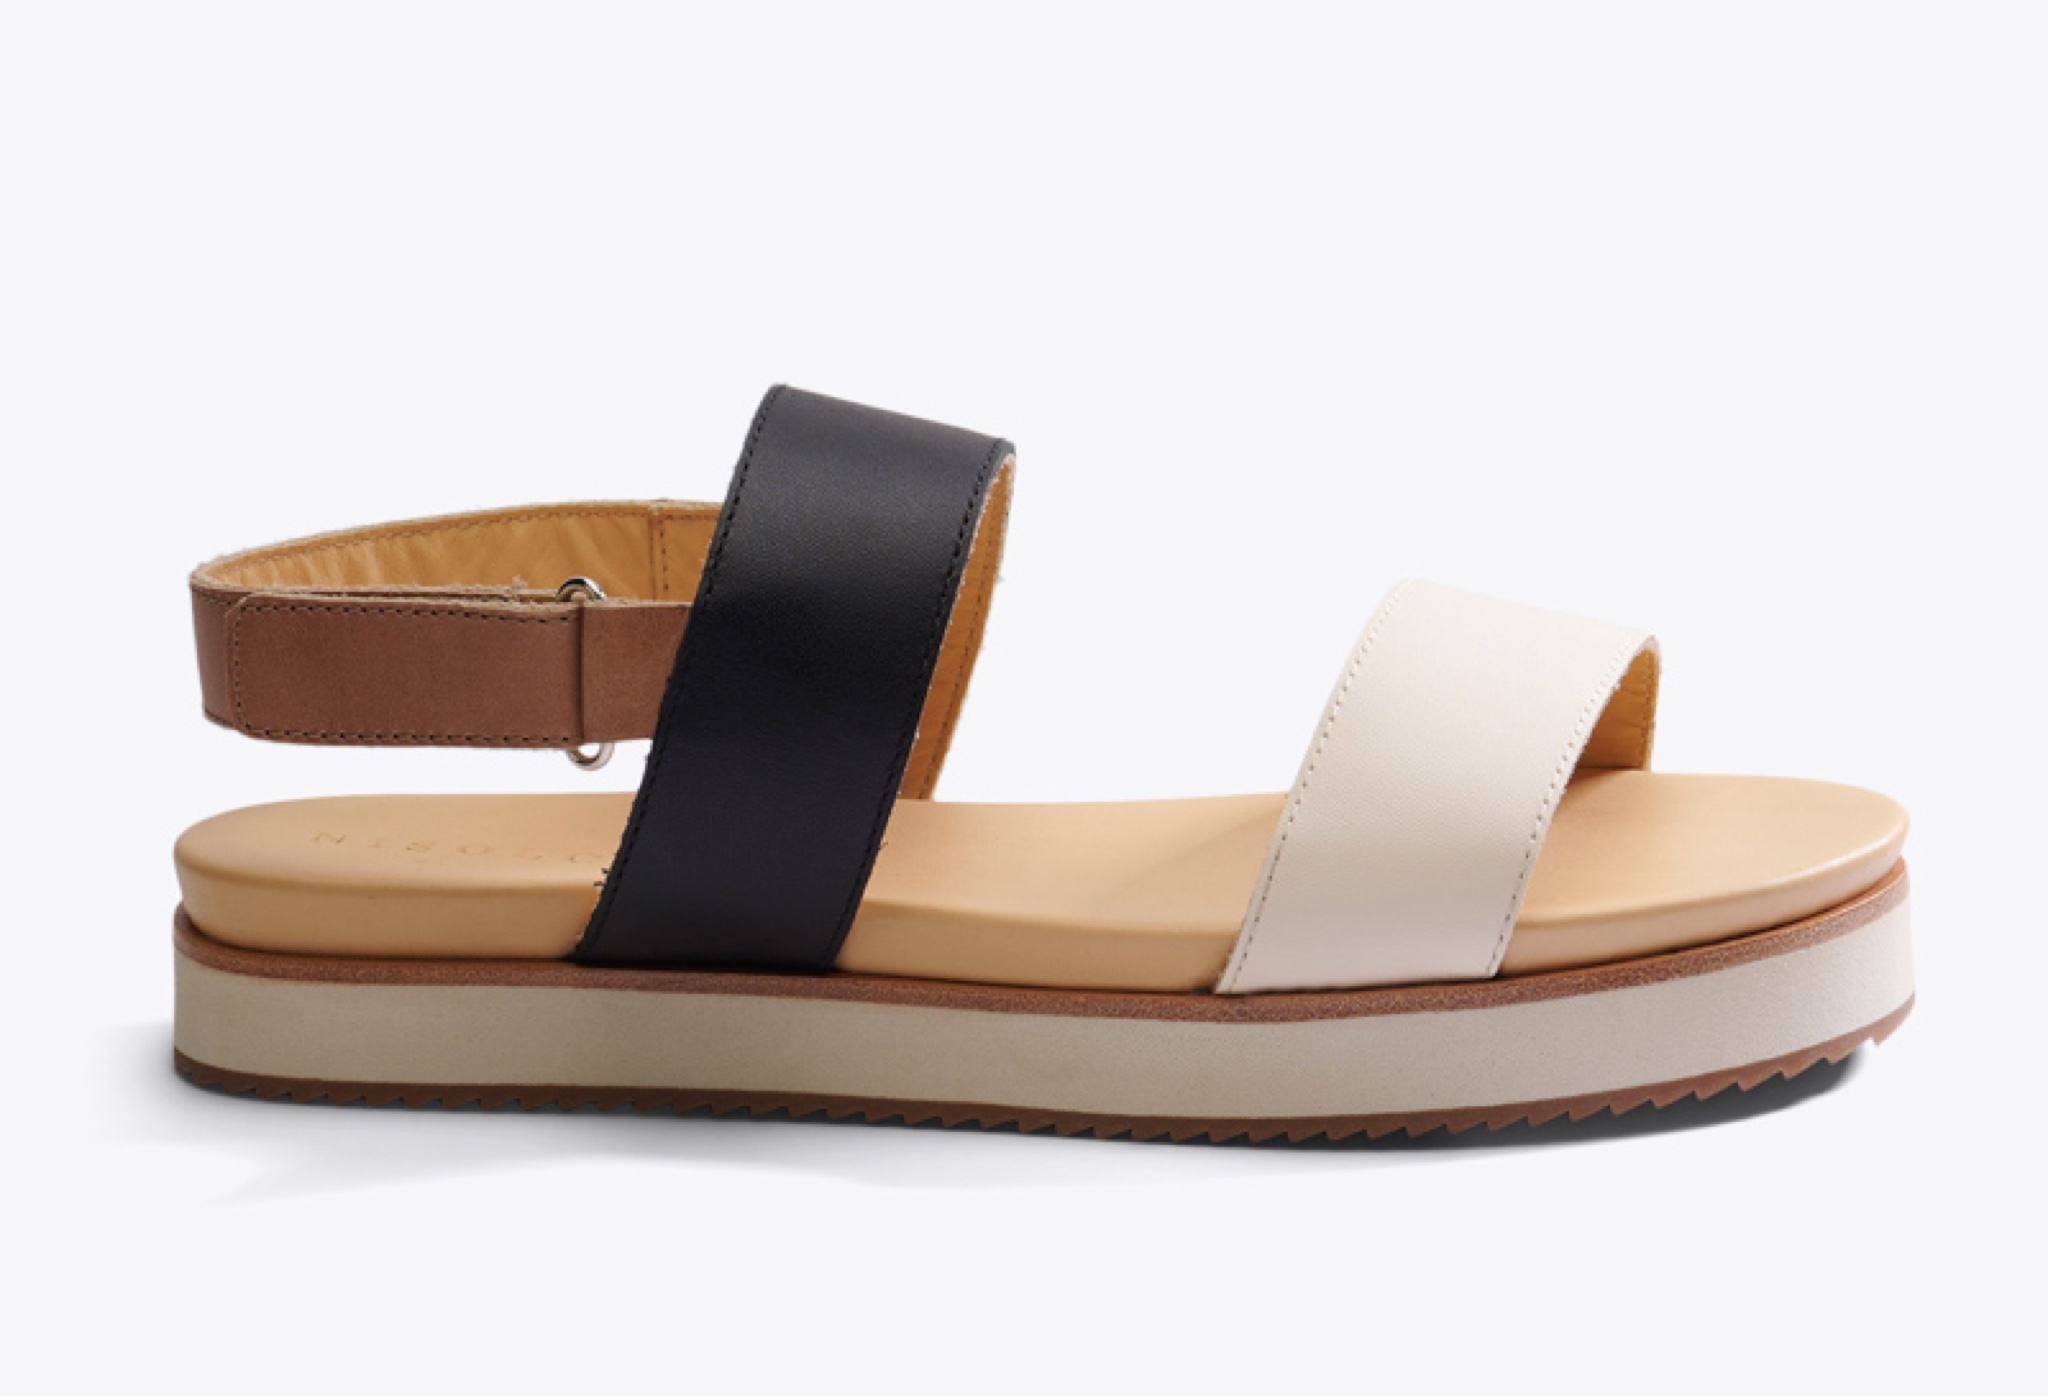 Nisolo Go-To Flatform Sandal Bone/Black Colorblock - Every Nisolo product is built on the foundation of comfort, function, and design. 